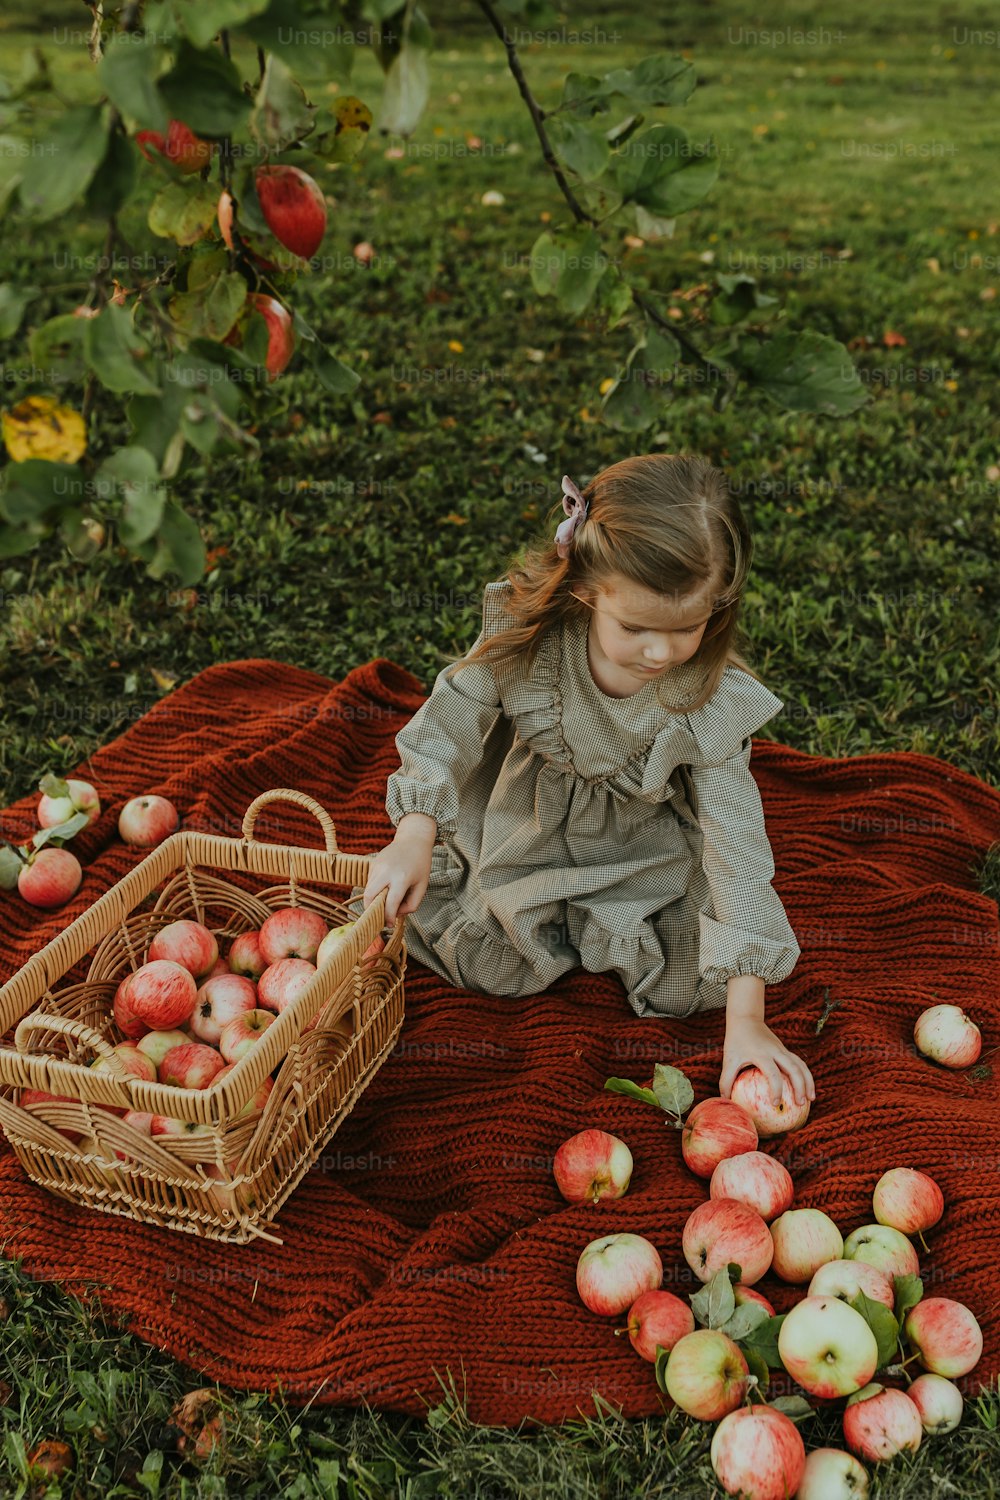 a little girl sitting on a blanket with apples in a basket